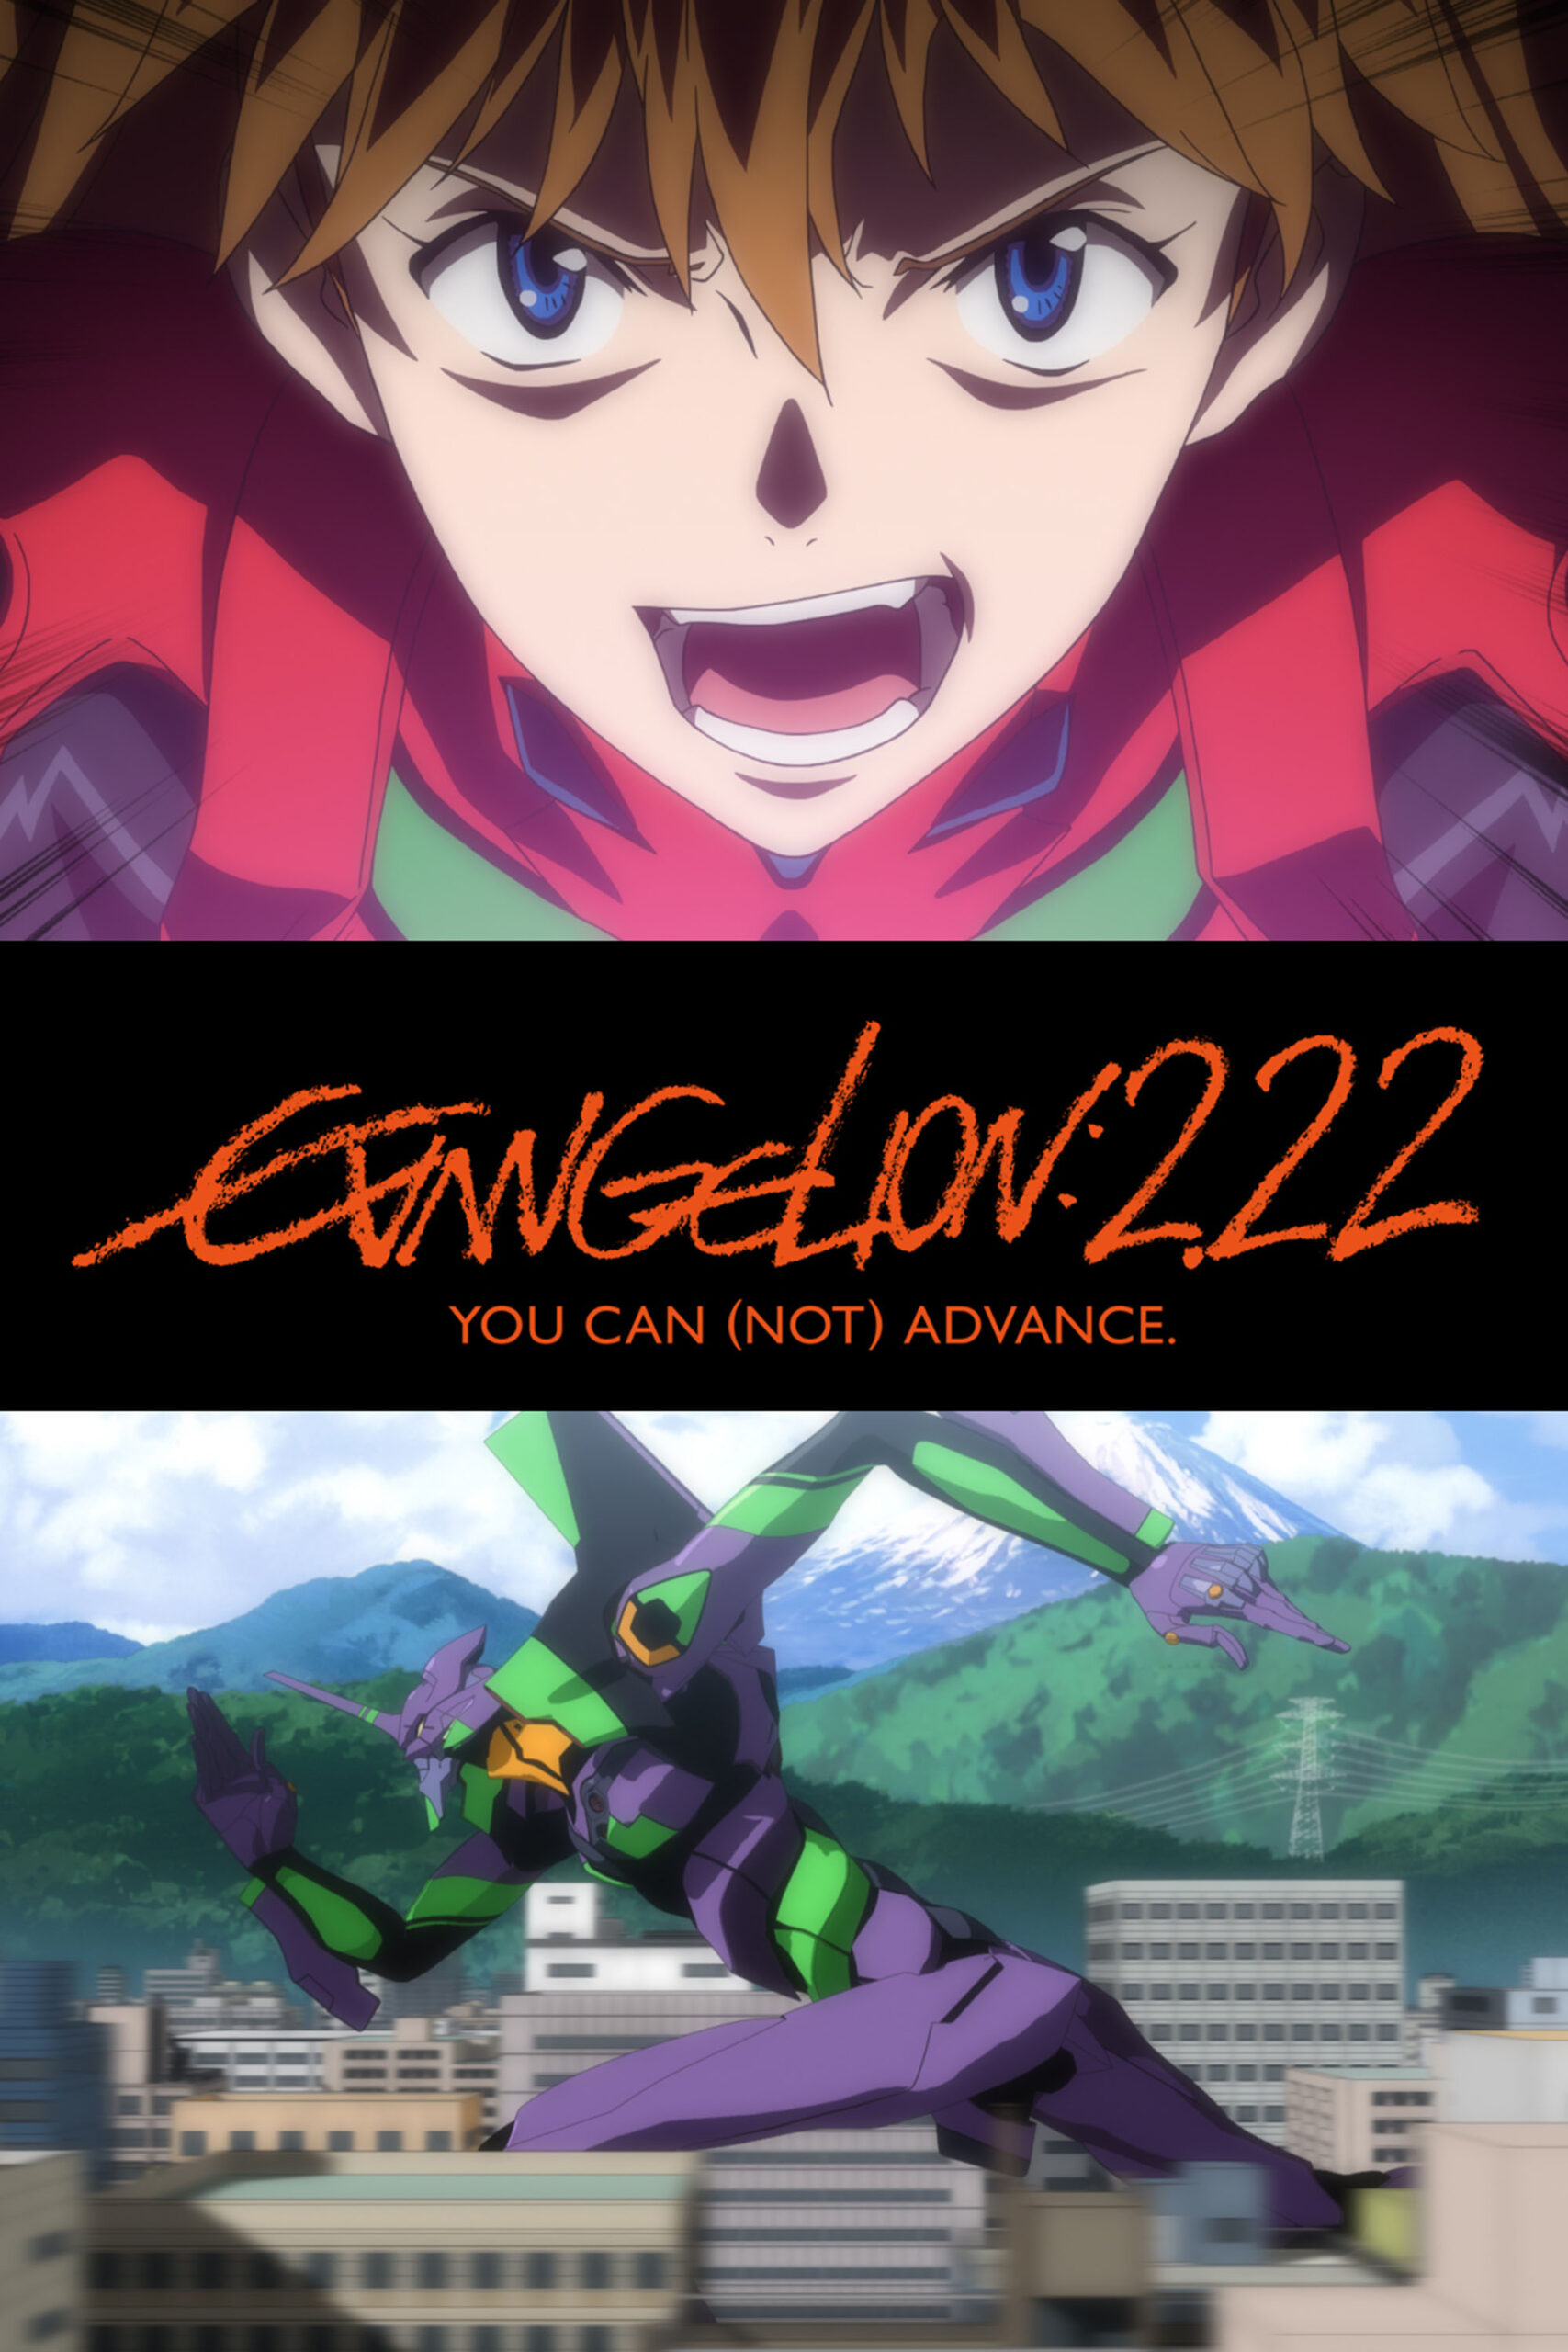 Evangelion 2.22 You can (not) advance